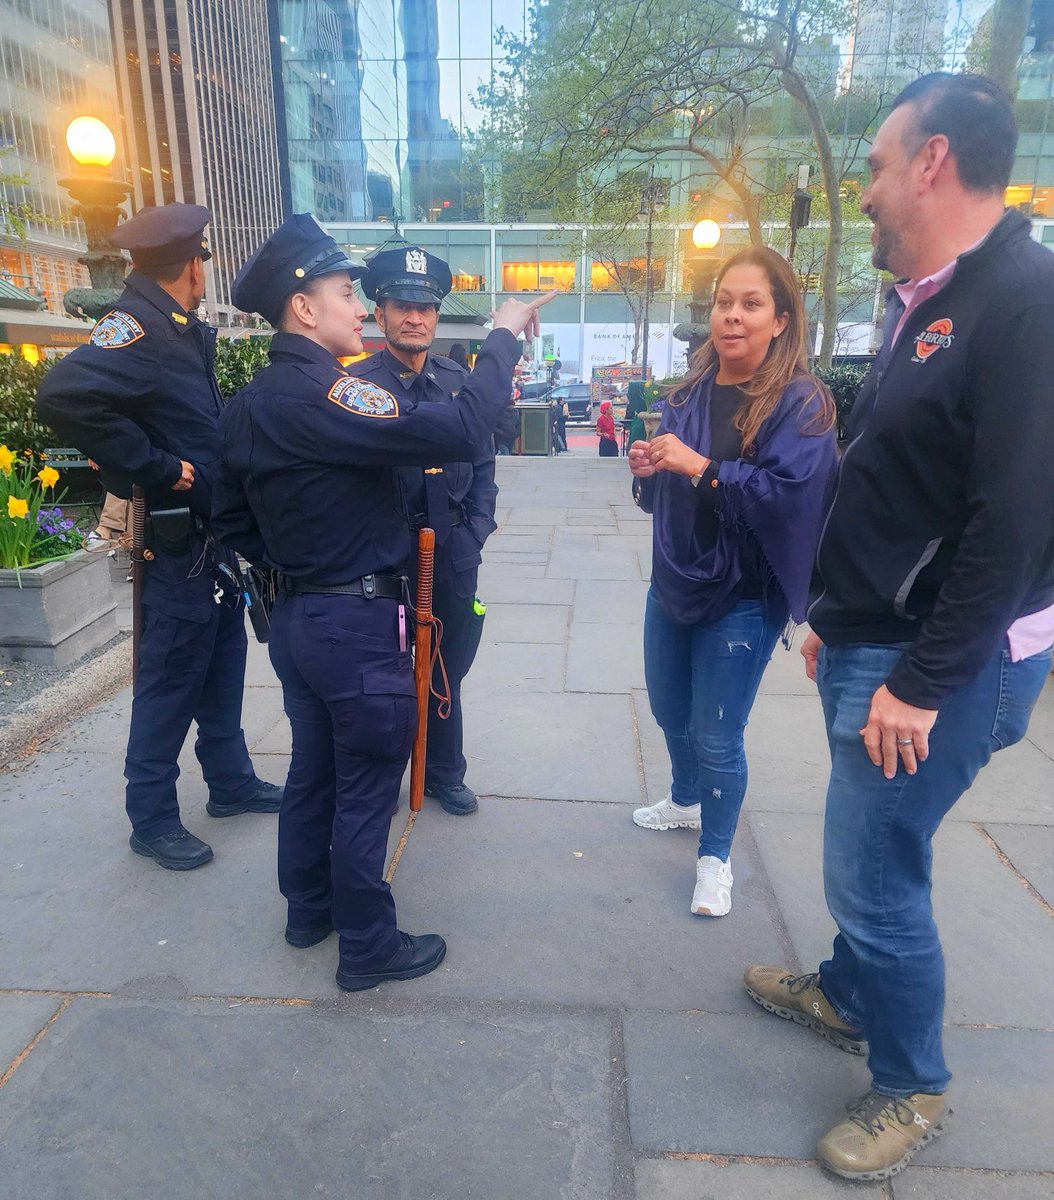 As the weather gets nicer🌞🌷, more people are enjoying our beautiful parks and outdoor seating in Manhattan. Bryant Park is the perfect combo of both! Midtown South Auxiliary Officers were deployed there to bring safety to park goers in our community. @NYPDAuxiliary